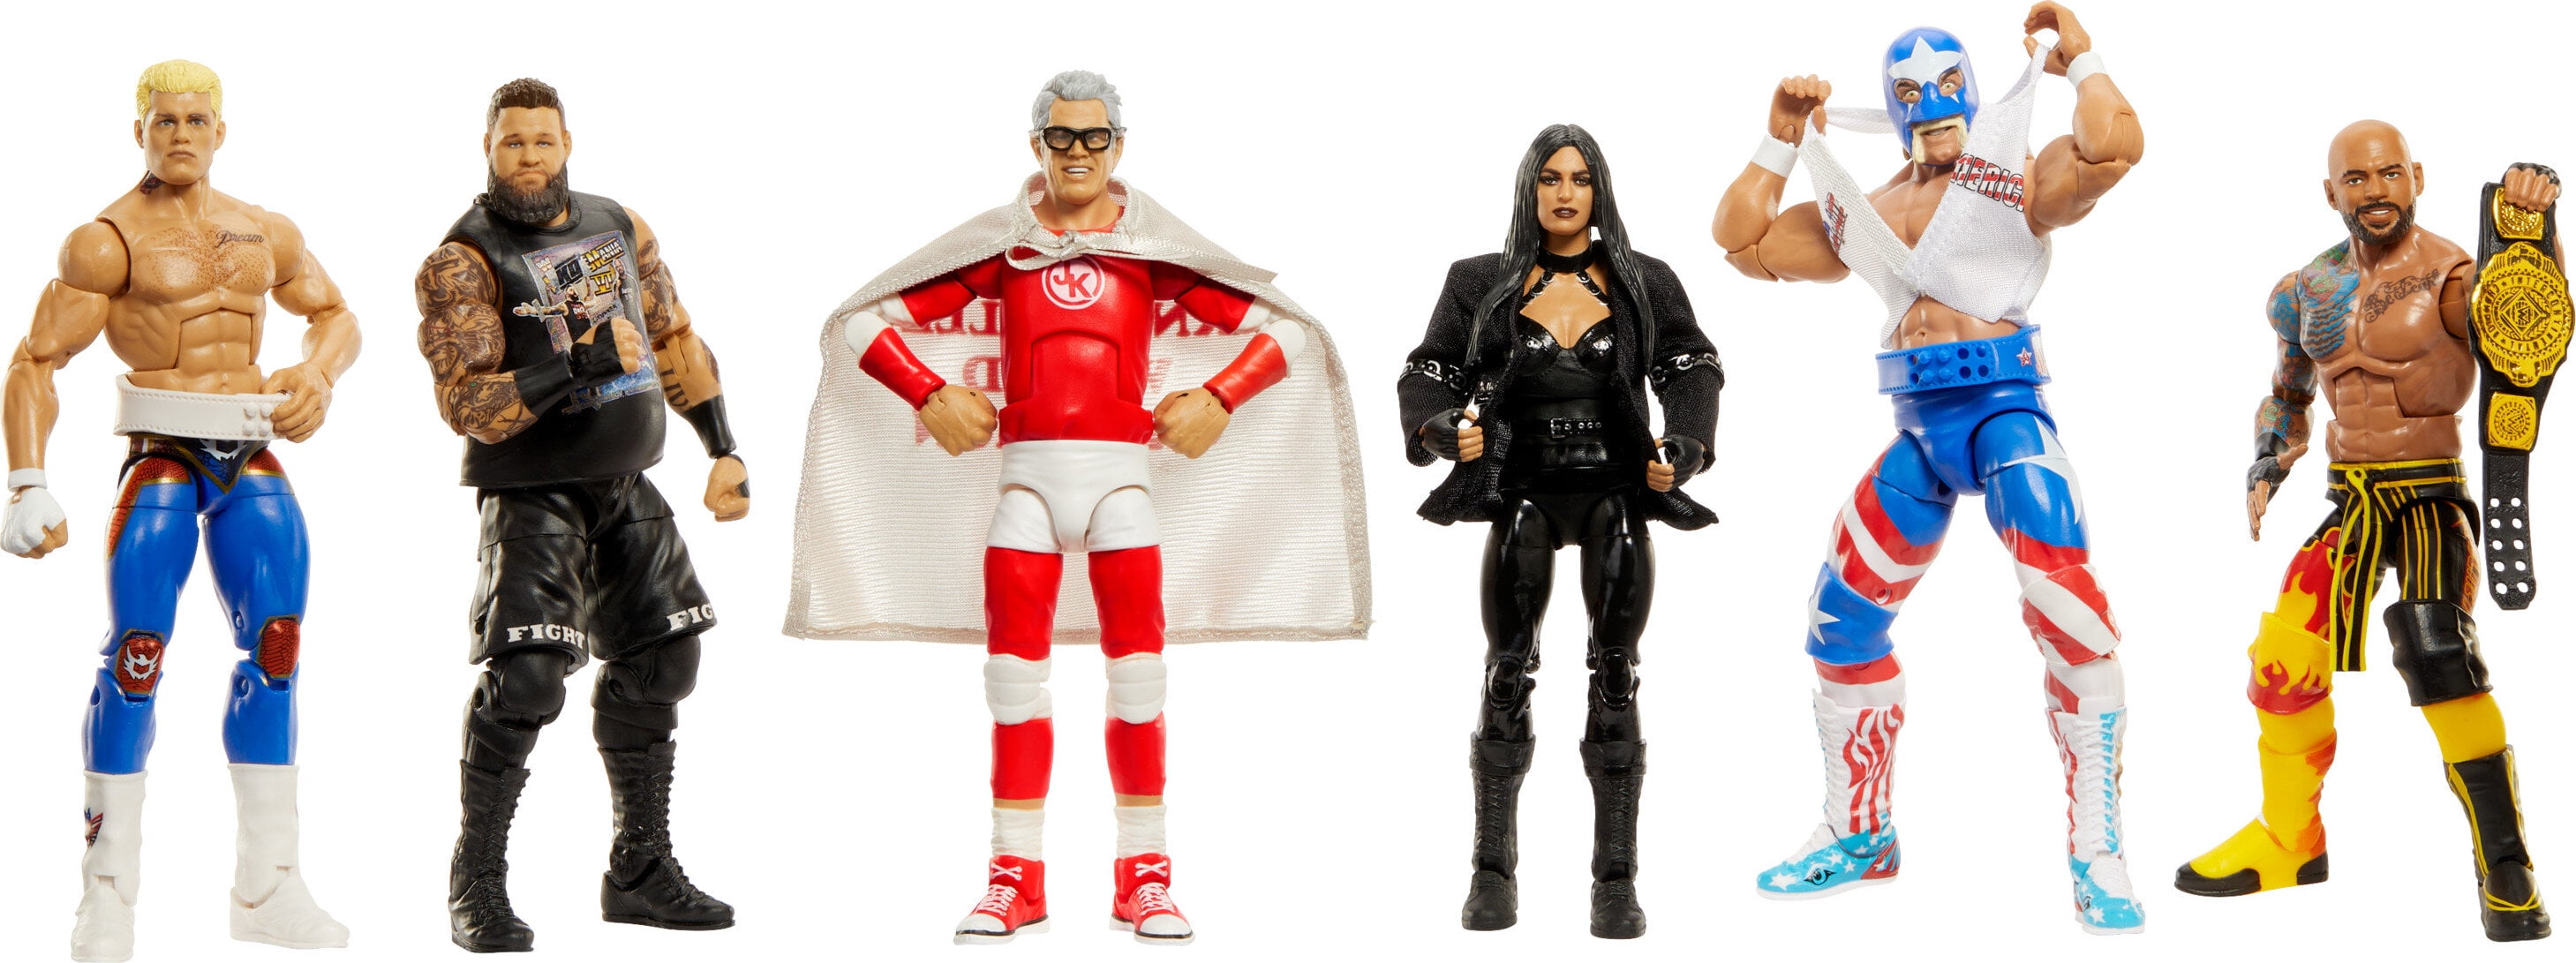 Picture of Mattel MTTGDF60 WWE Elite Fig Collection Assortment Toy - Pack of 8